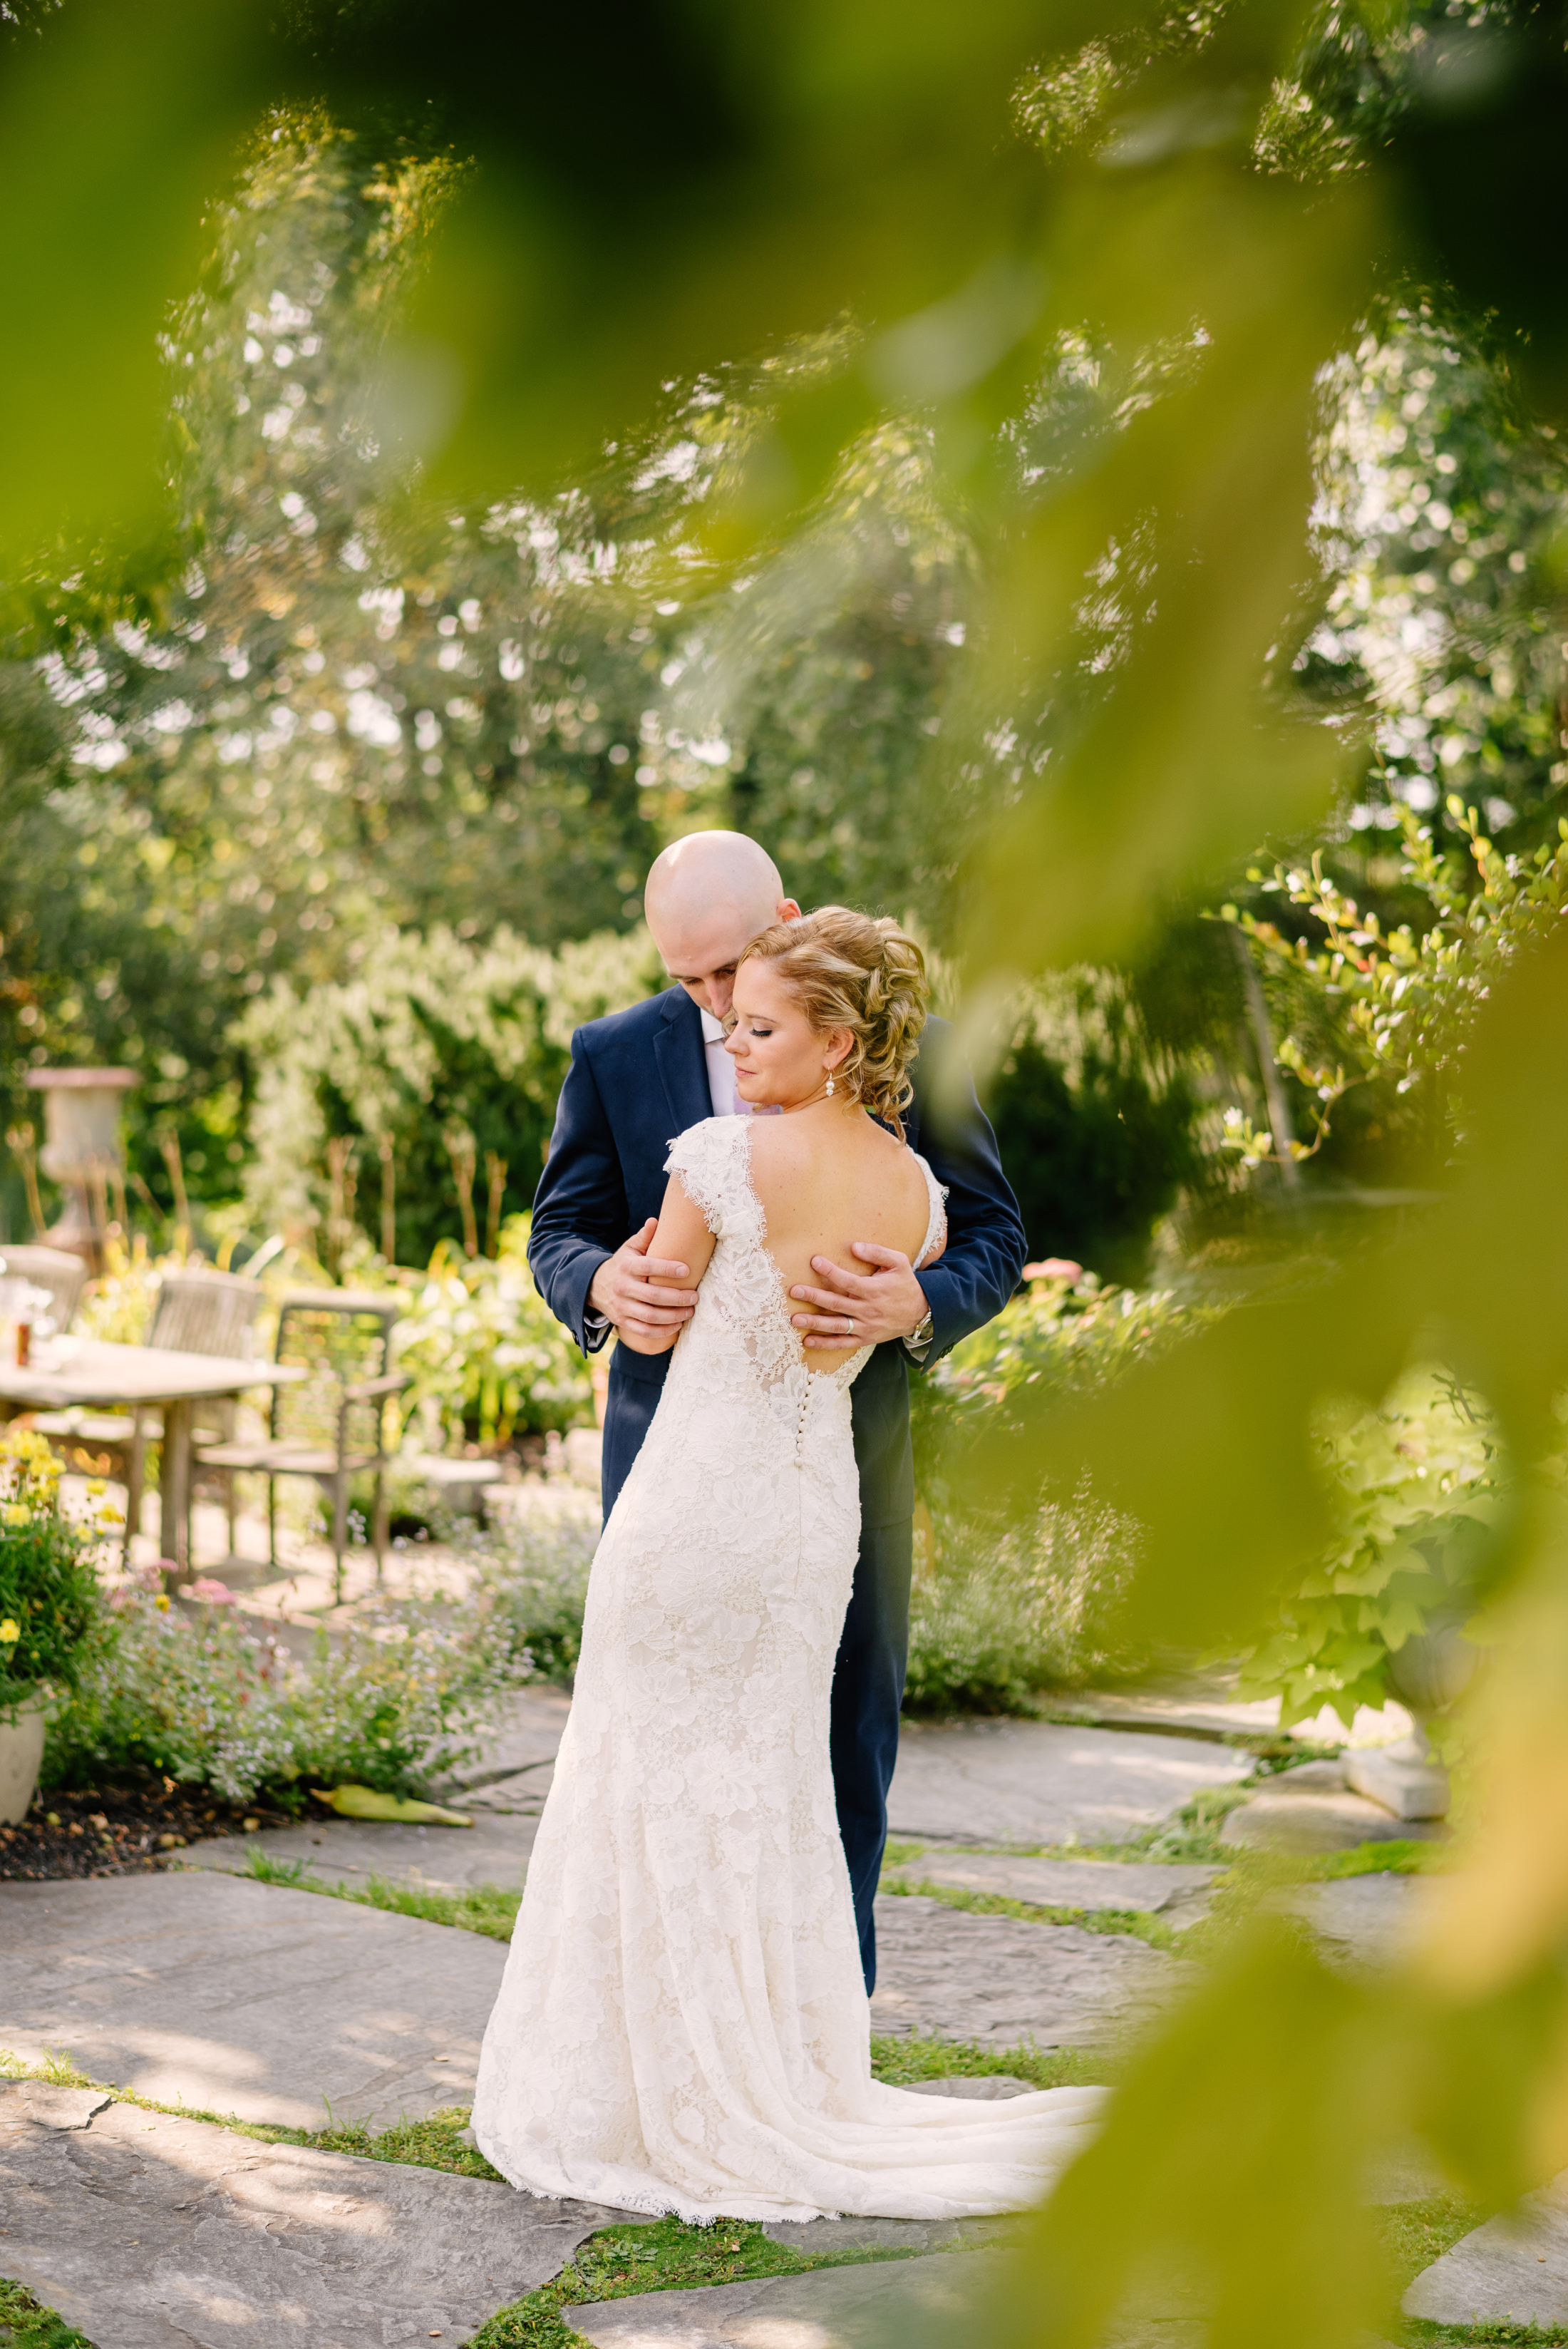 stunning wedding portrait of a couple at the Herb Lyceum in groton, massachusetts